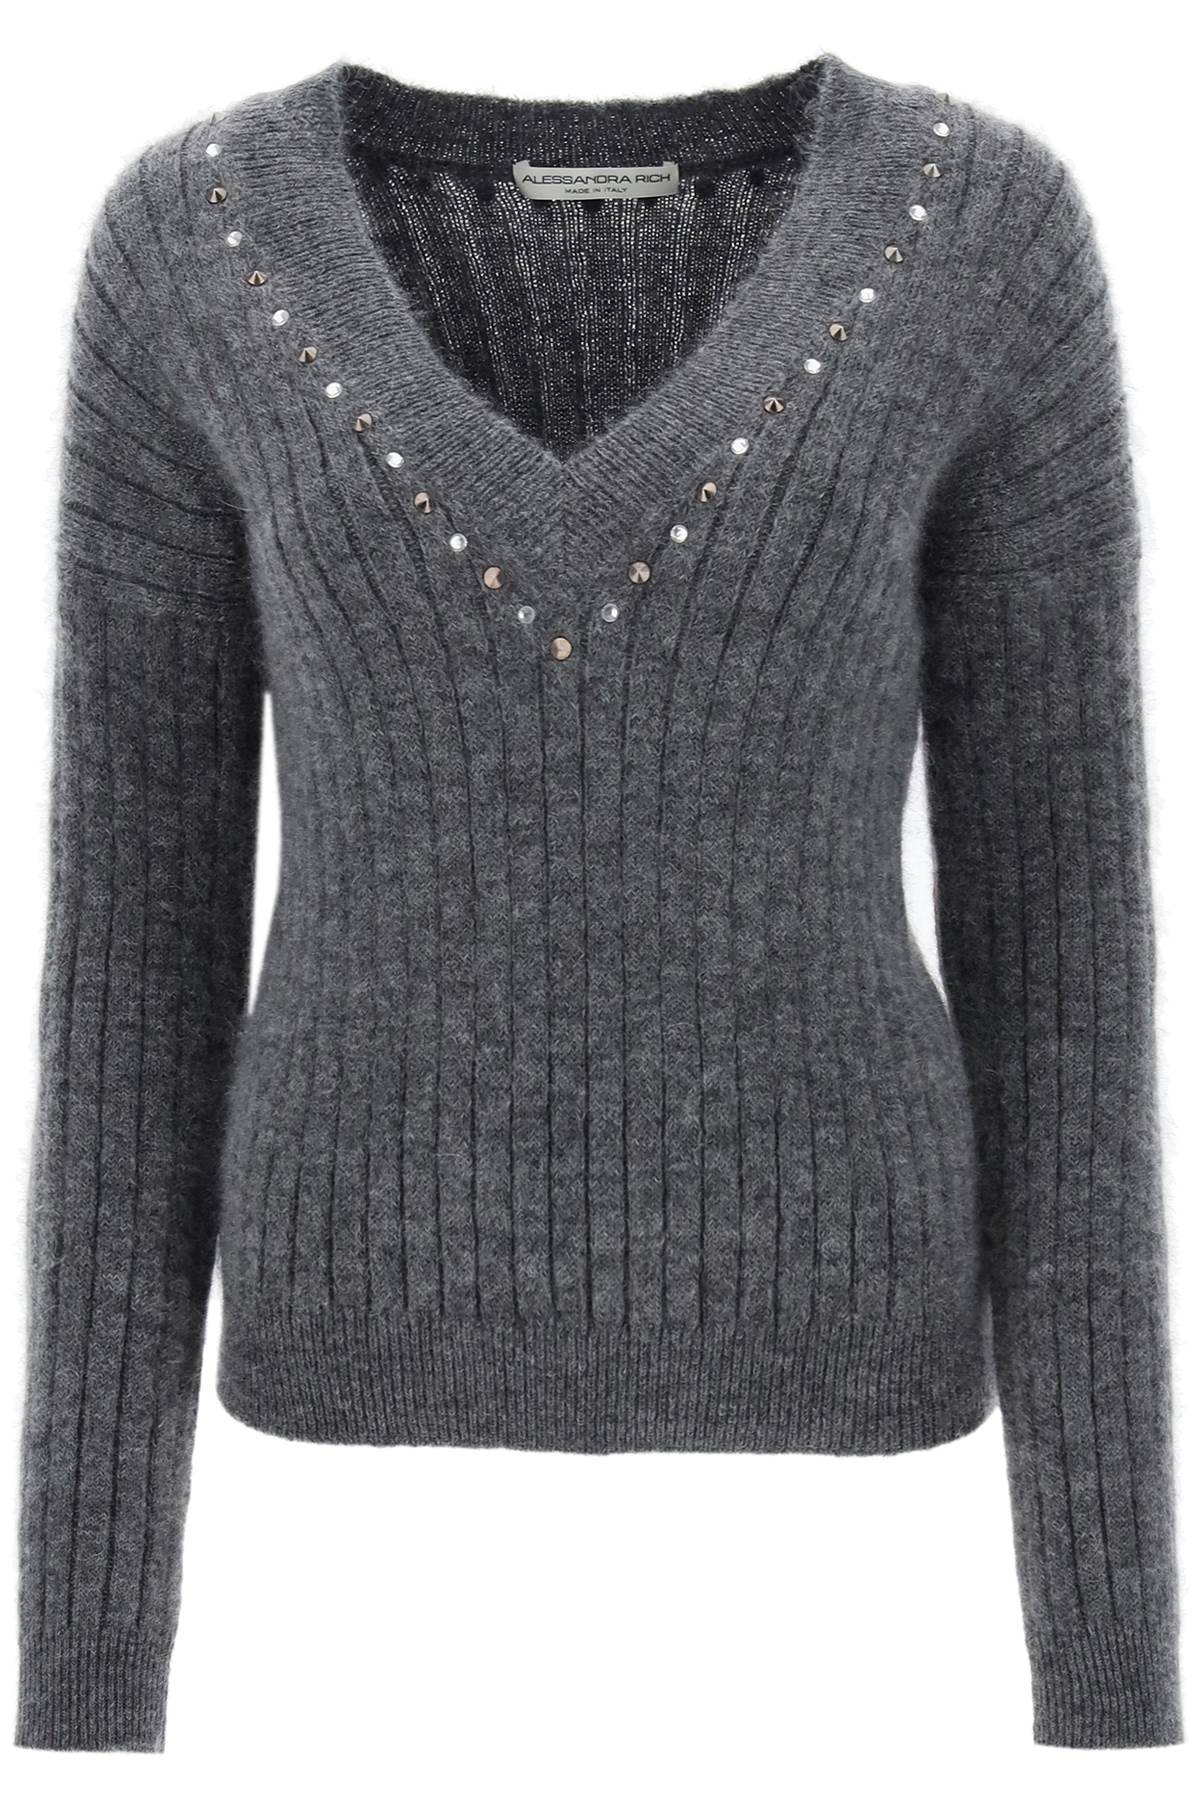 Shop Alessandra Rich Wool Knit Sweater With Studs And Crystals In Grey Melange (grey)